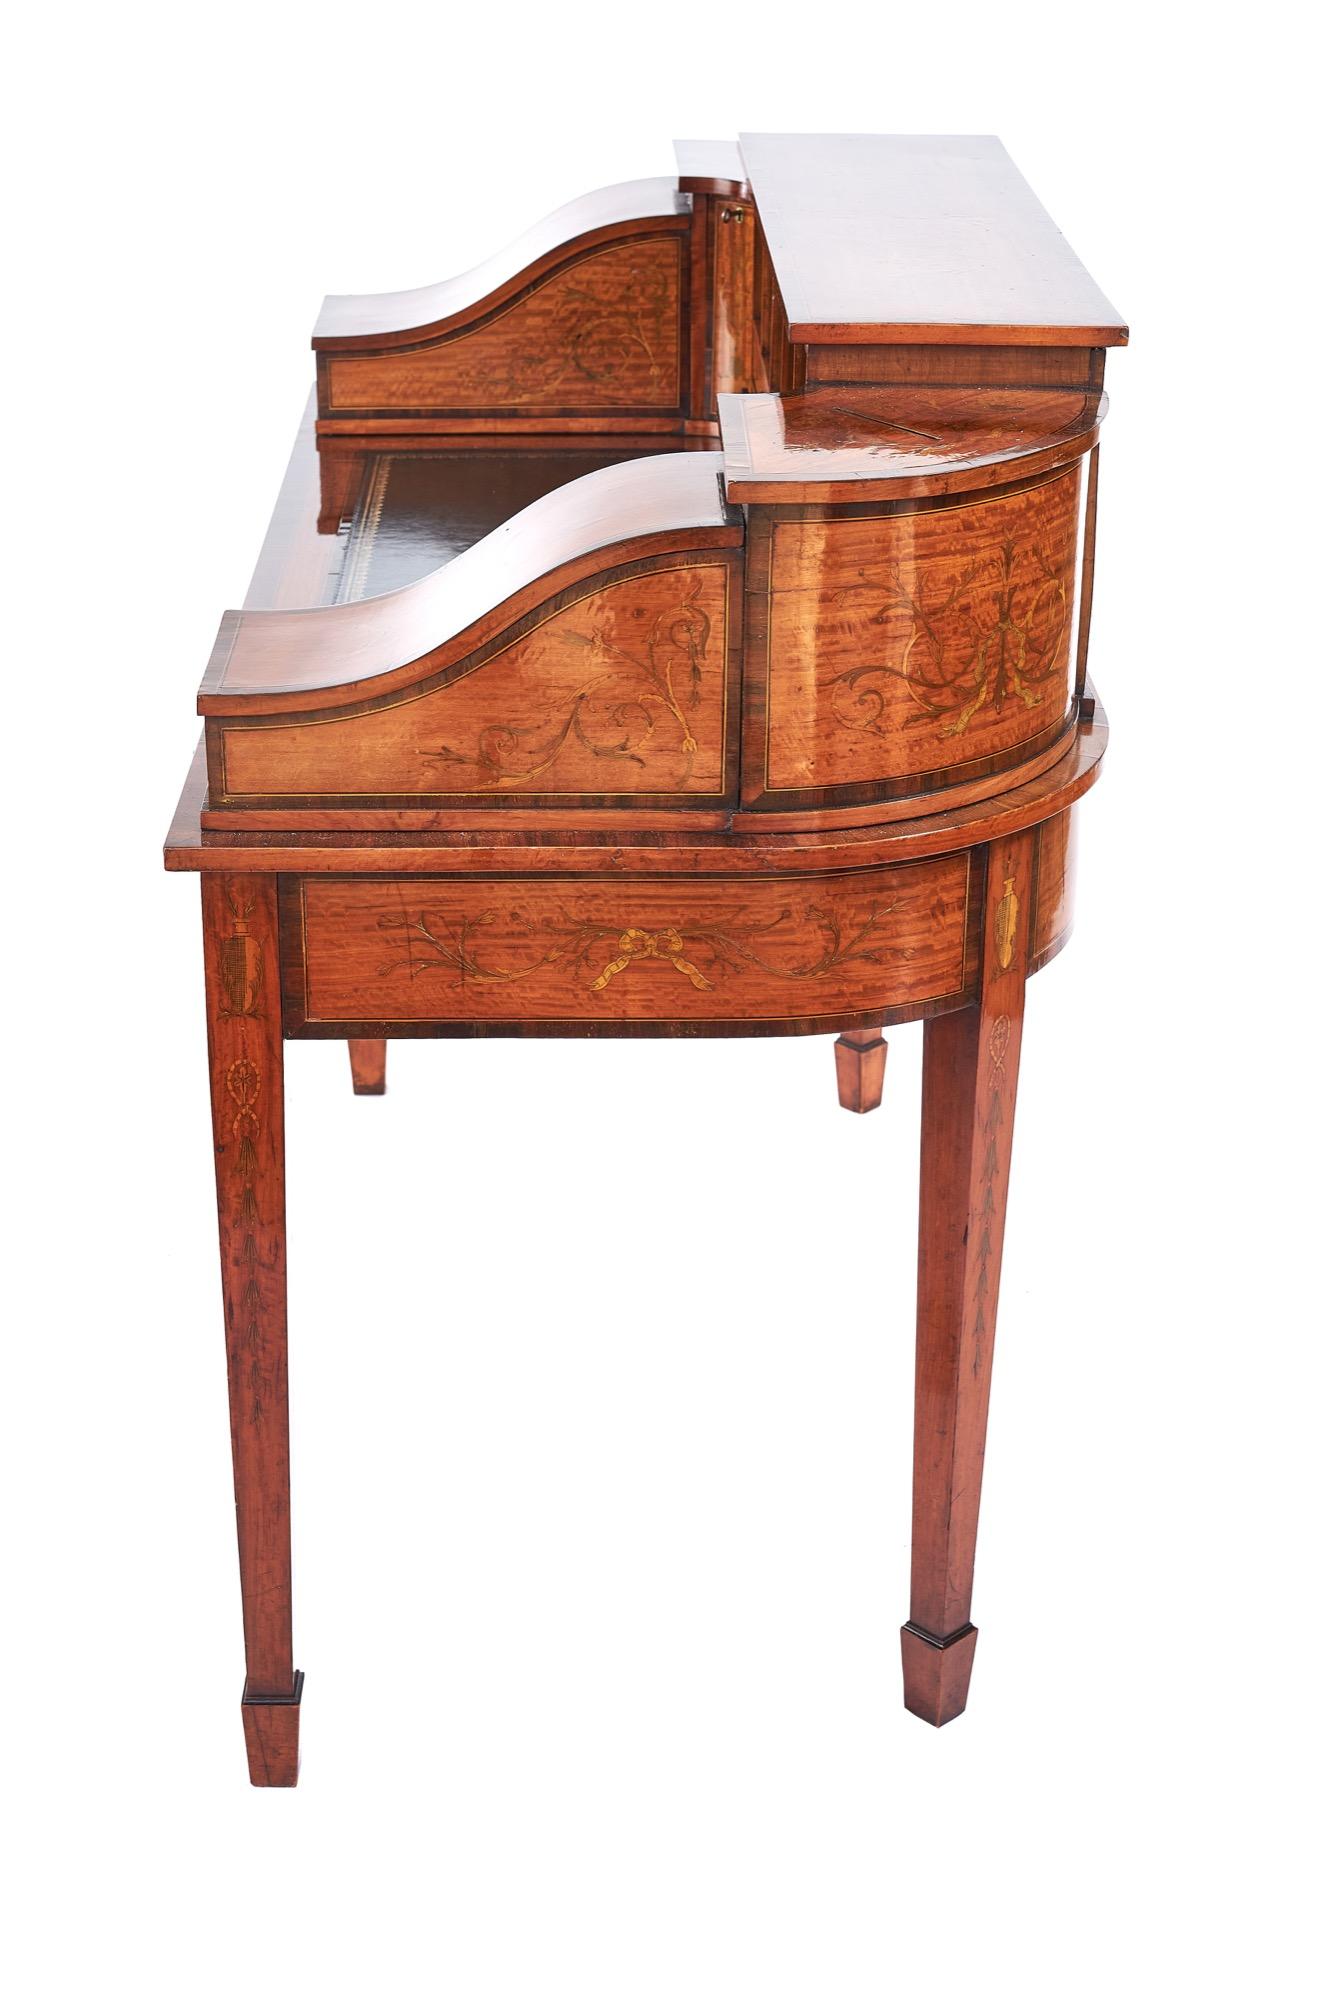 English Fine Sheraton Revival Satinwood Inlaid Carlton House Desk. with Letter Boxes, Ci For Sale